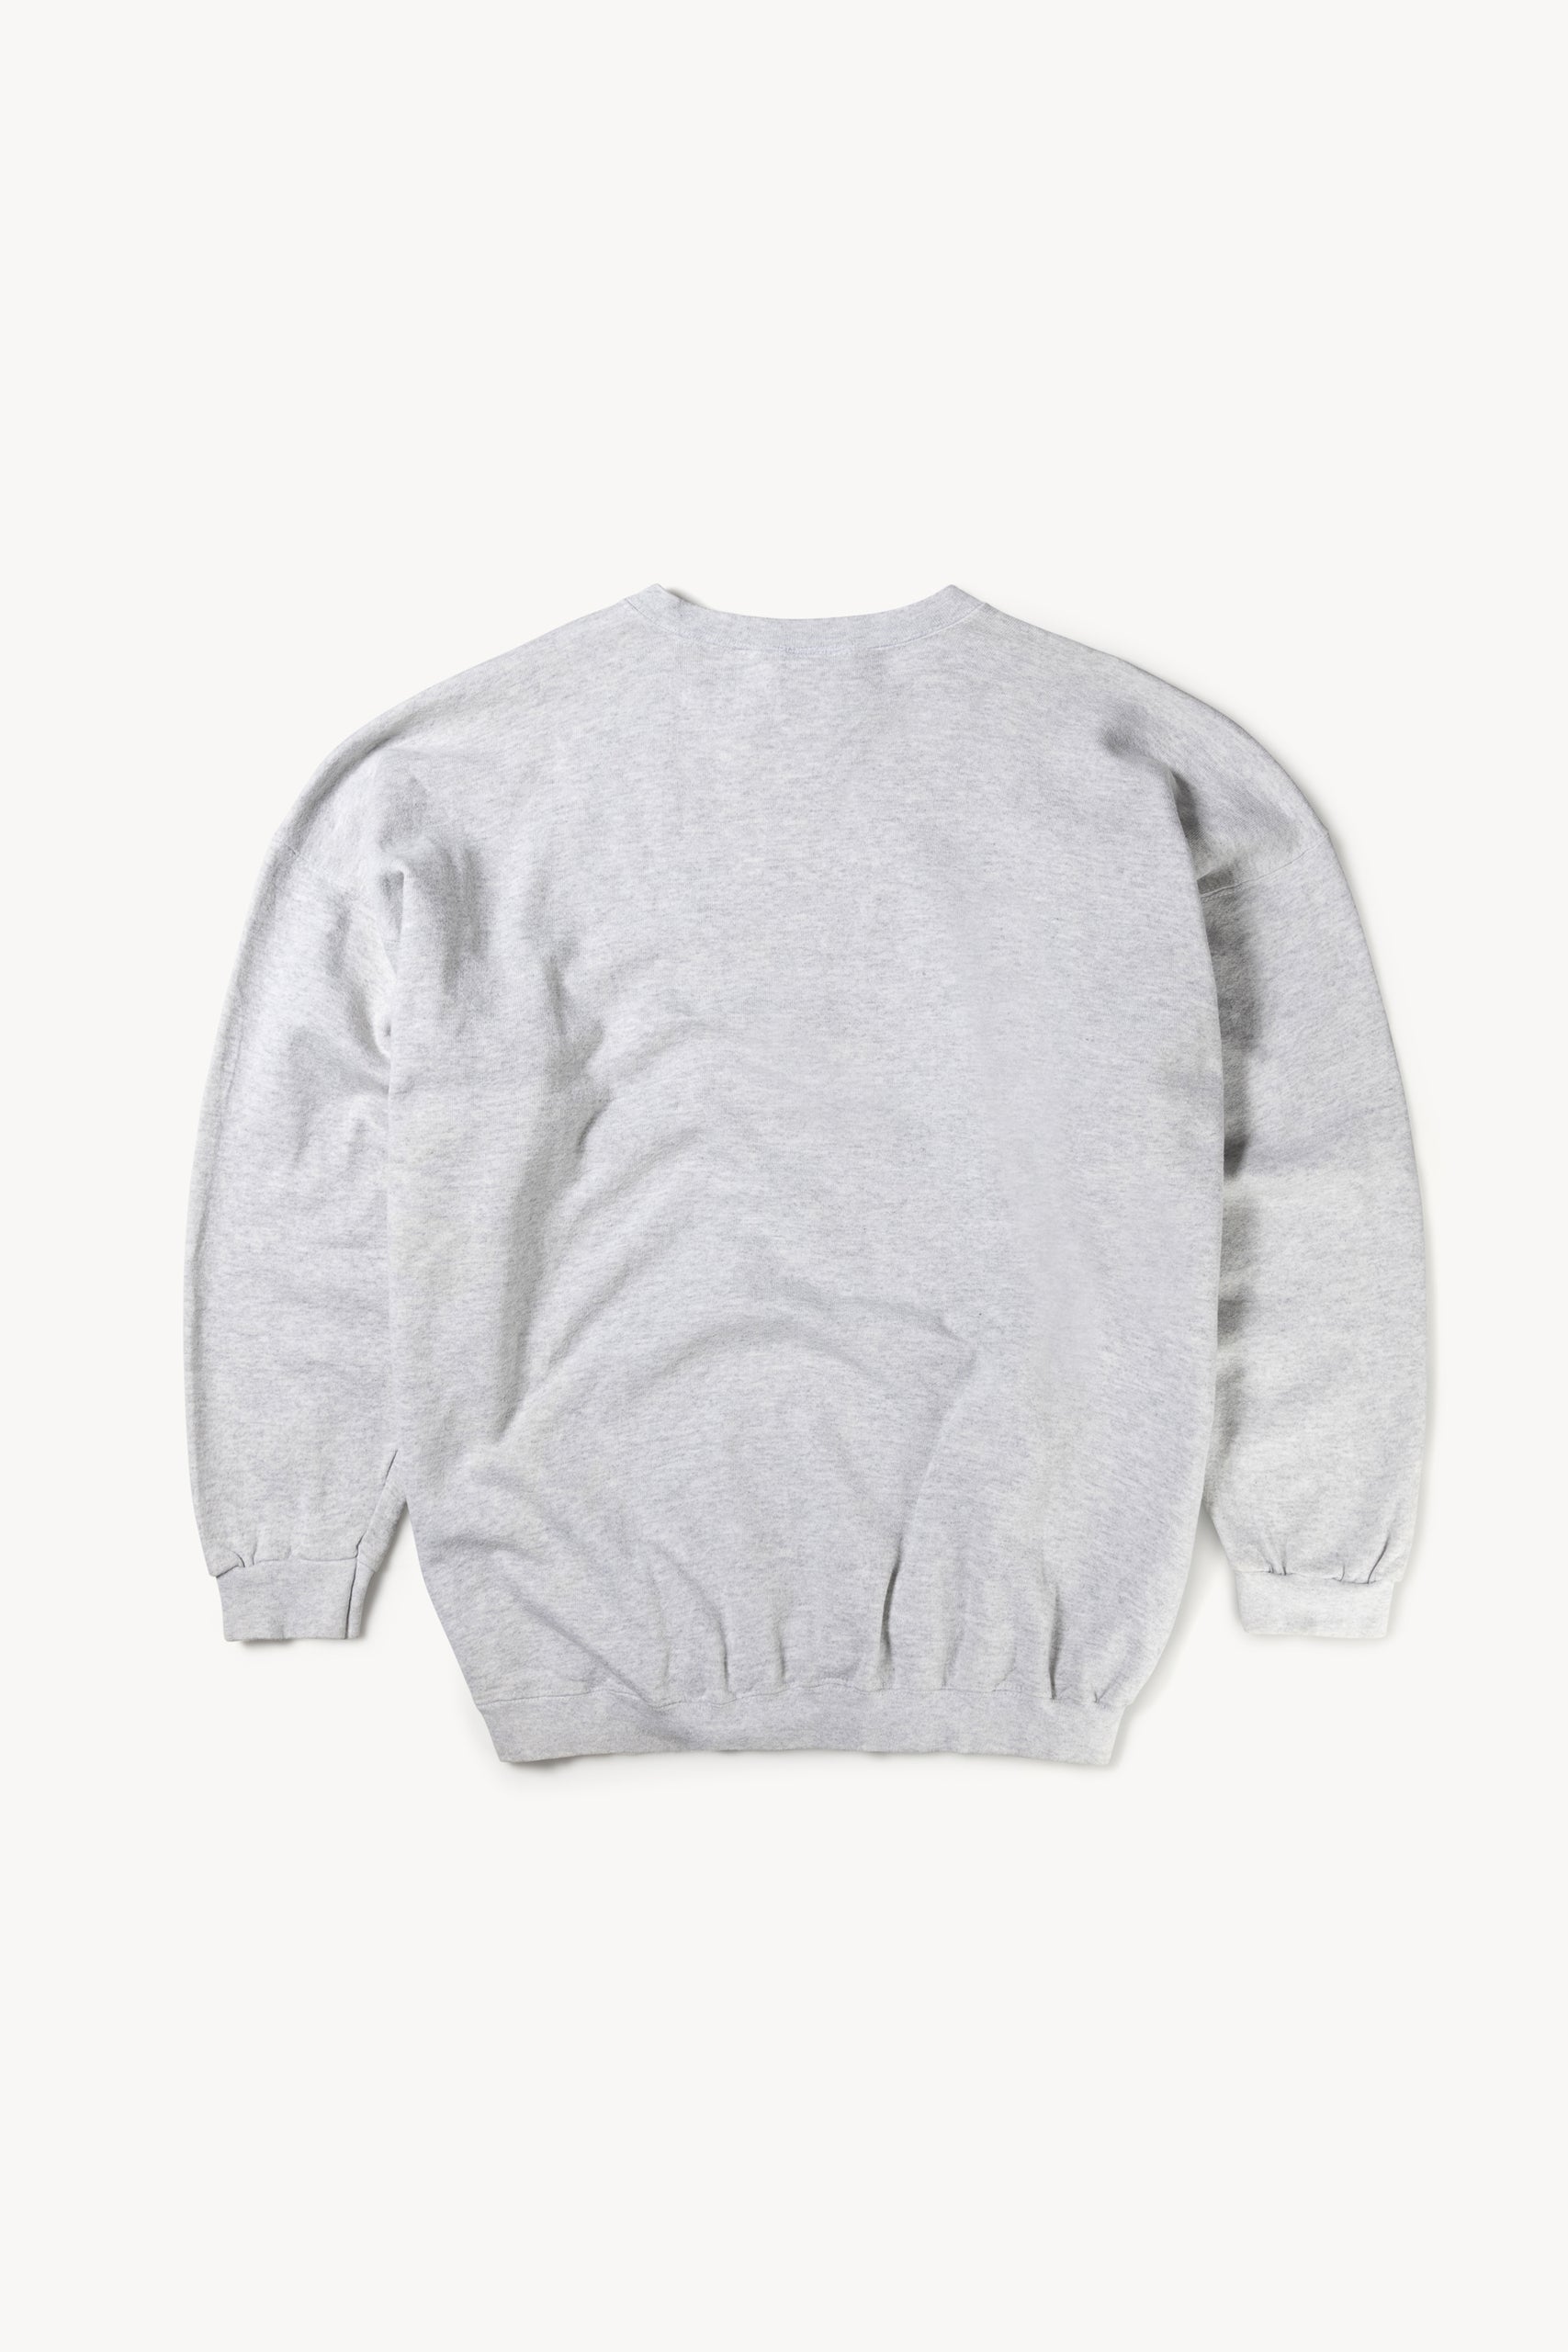 Load image into Gallery viewer, Tommy x Aries Remade: Overprinted Crewneck Sweatshirt